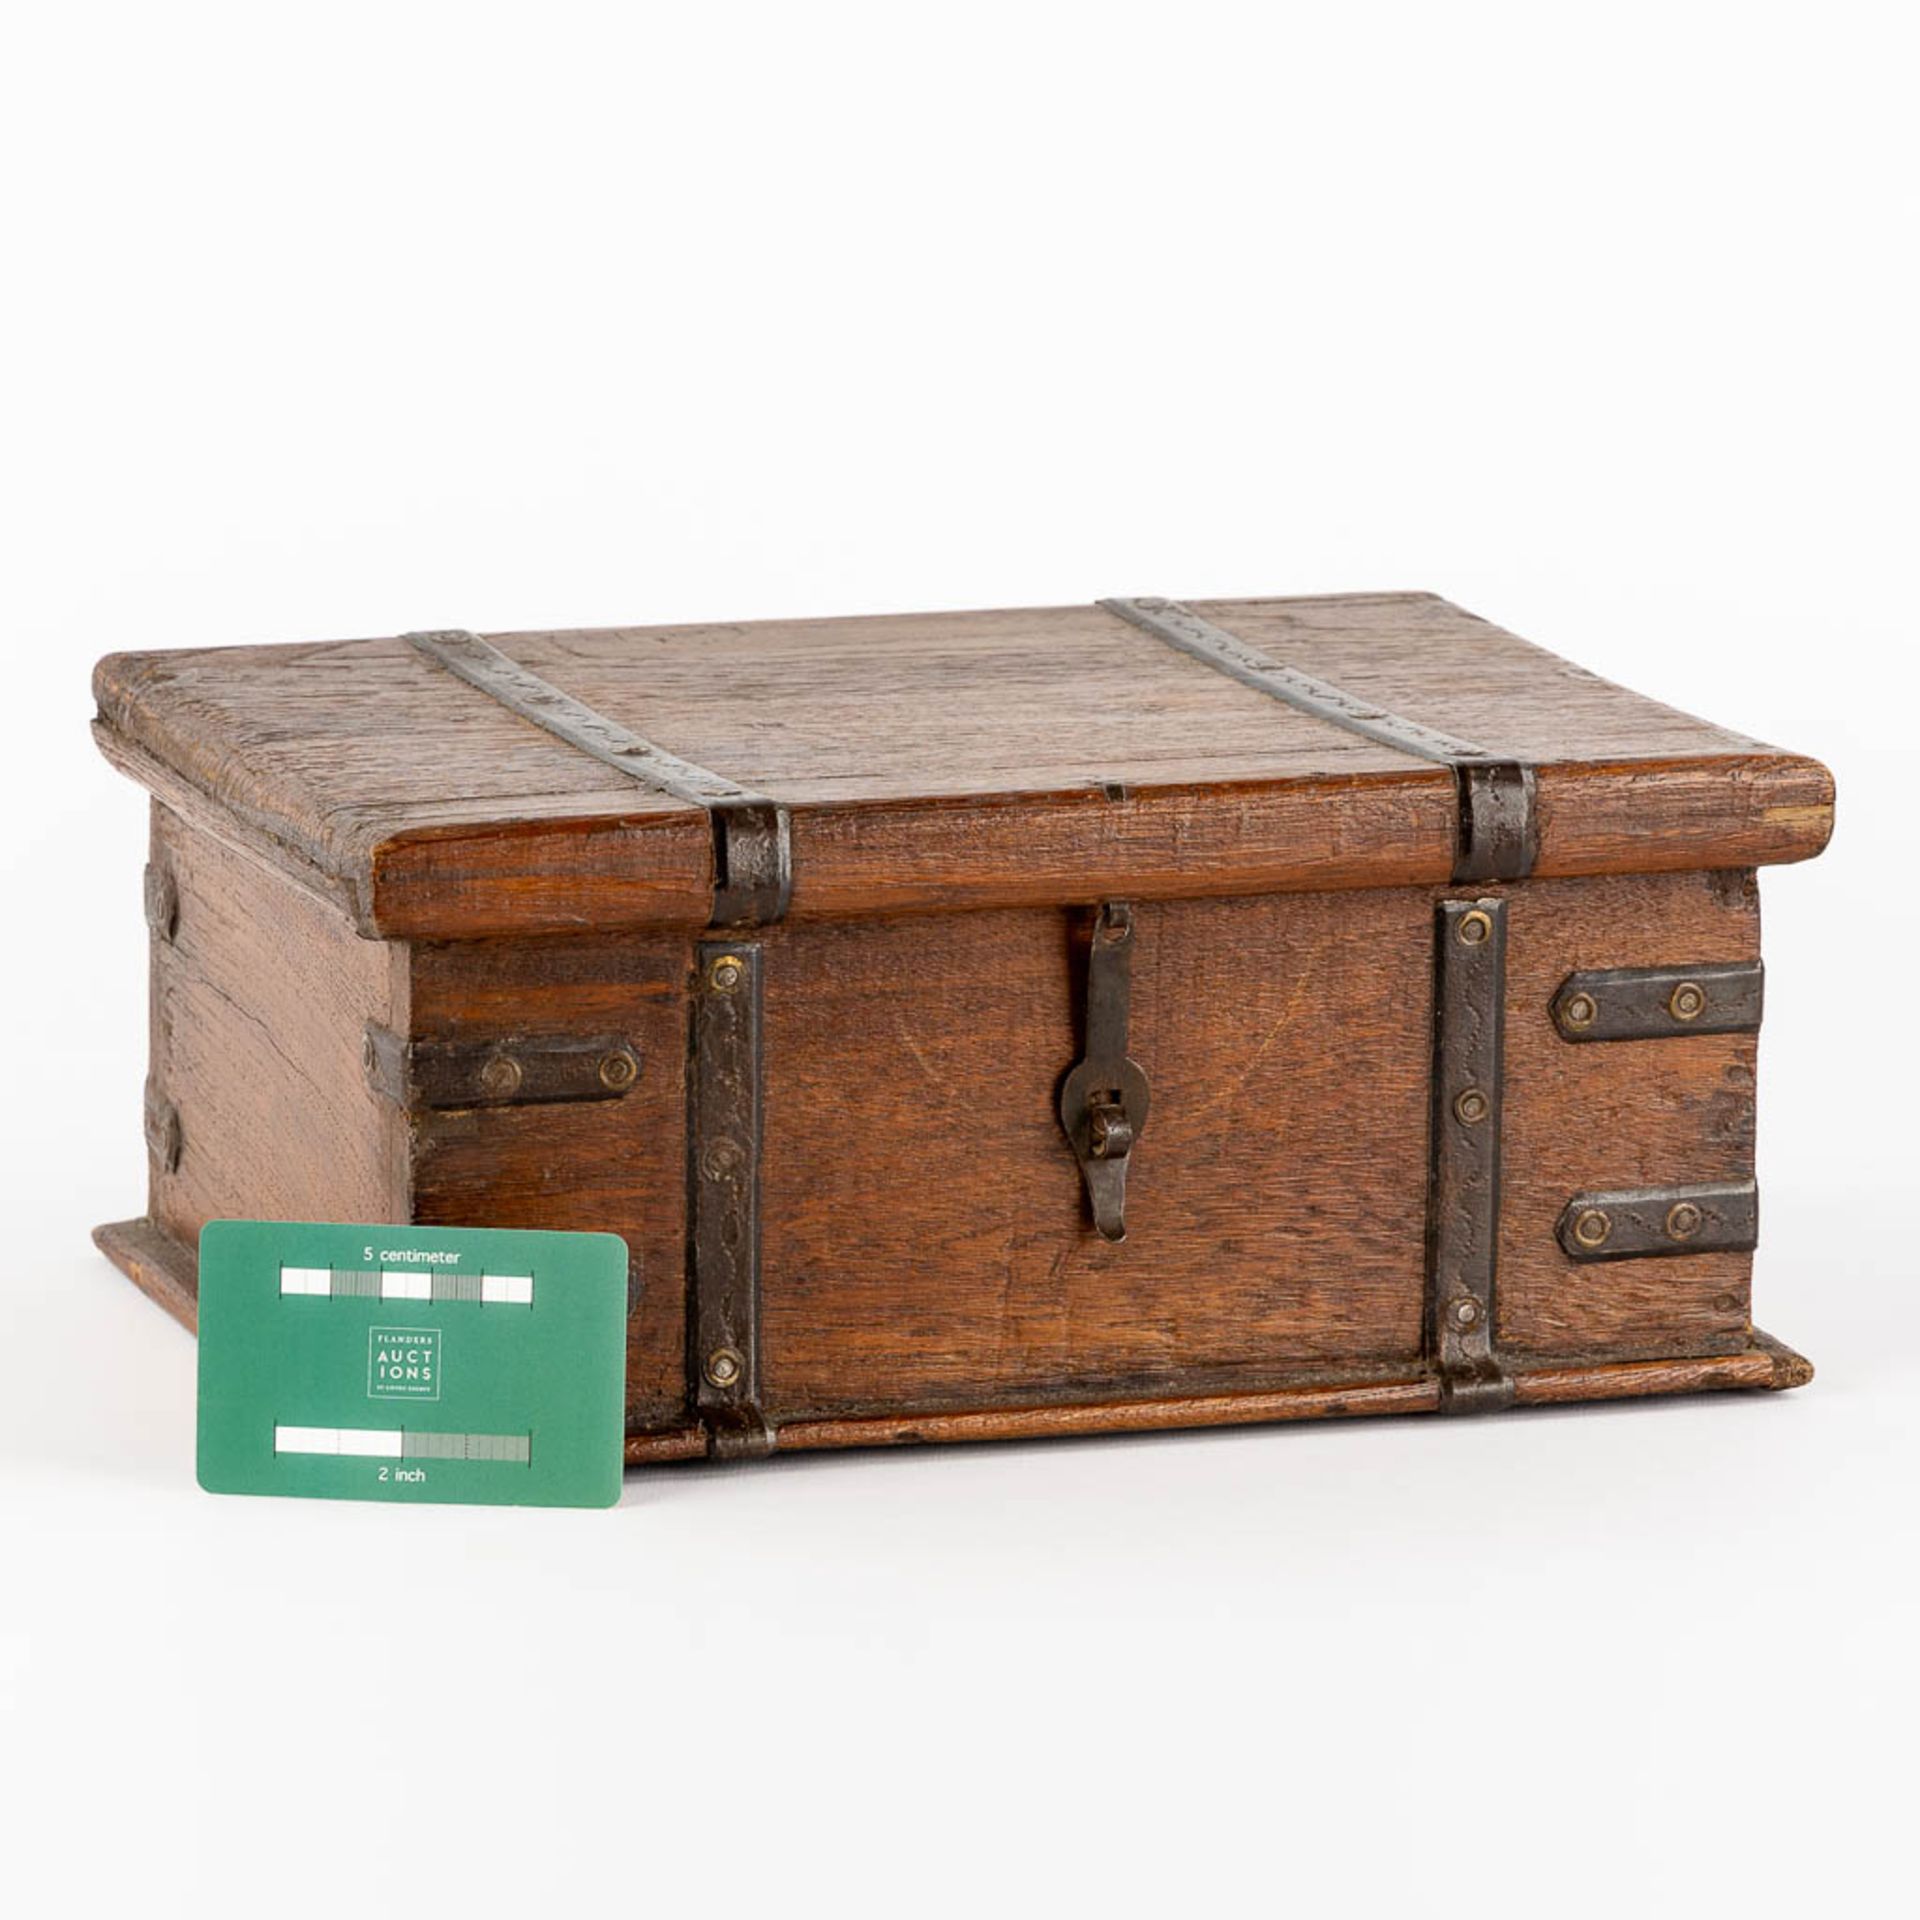 An antique money box or storage chest, oak and wrought iron, 19th C. (L:23 x W:31 x H:13 cm) - Image 2 of 13